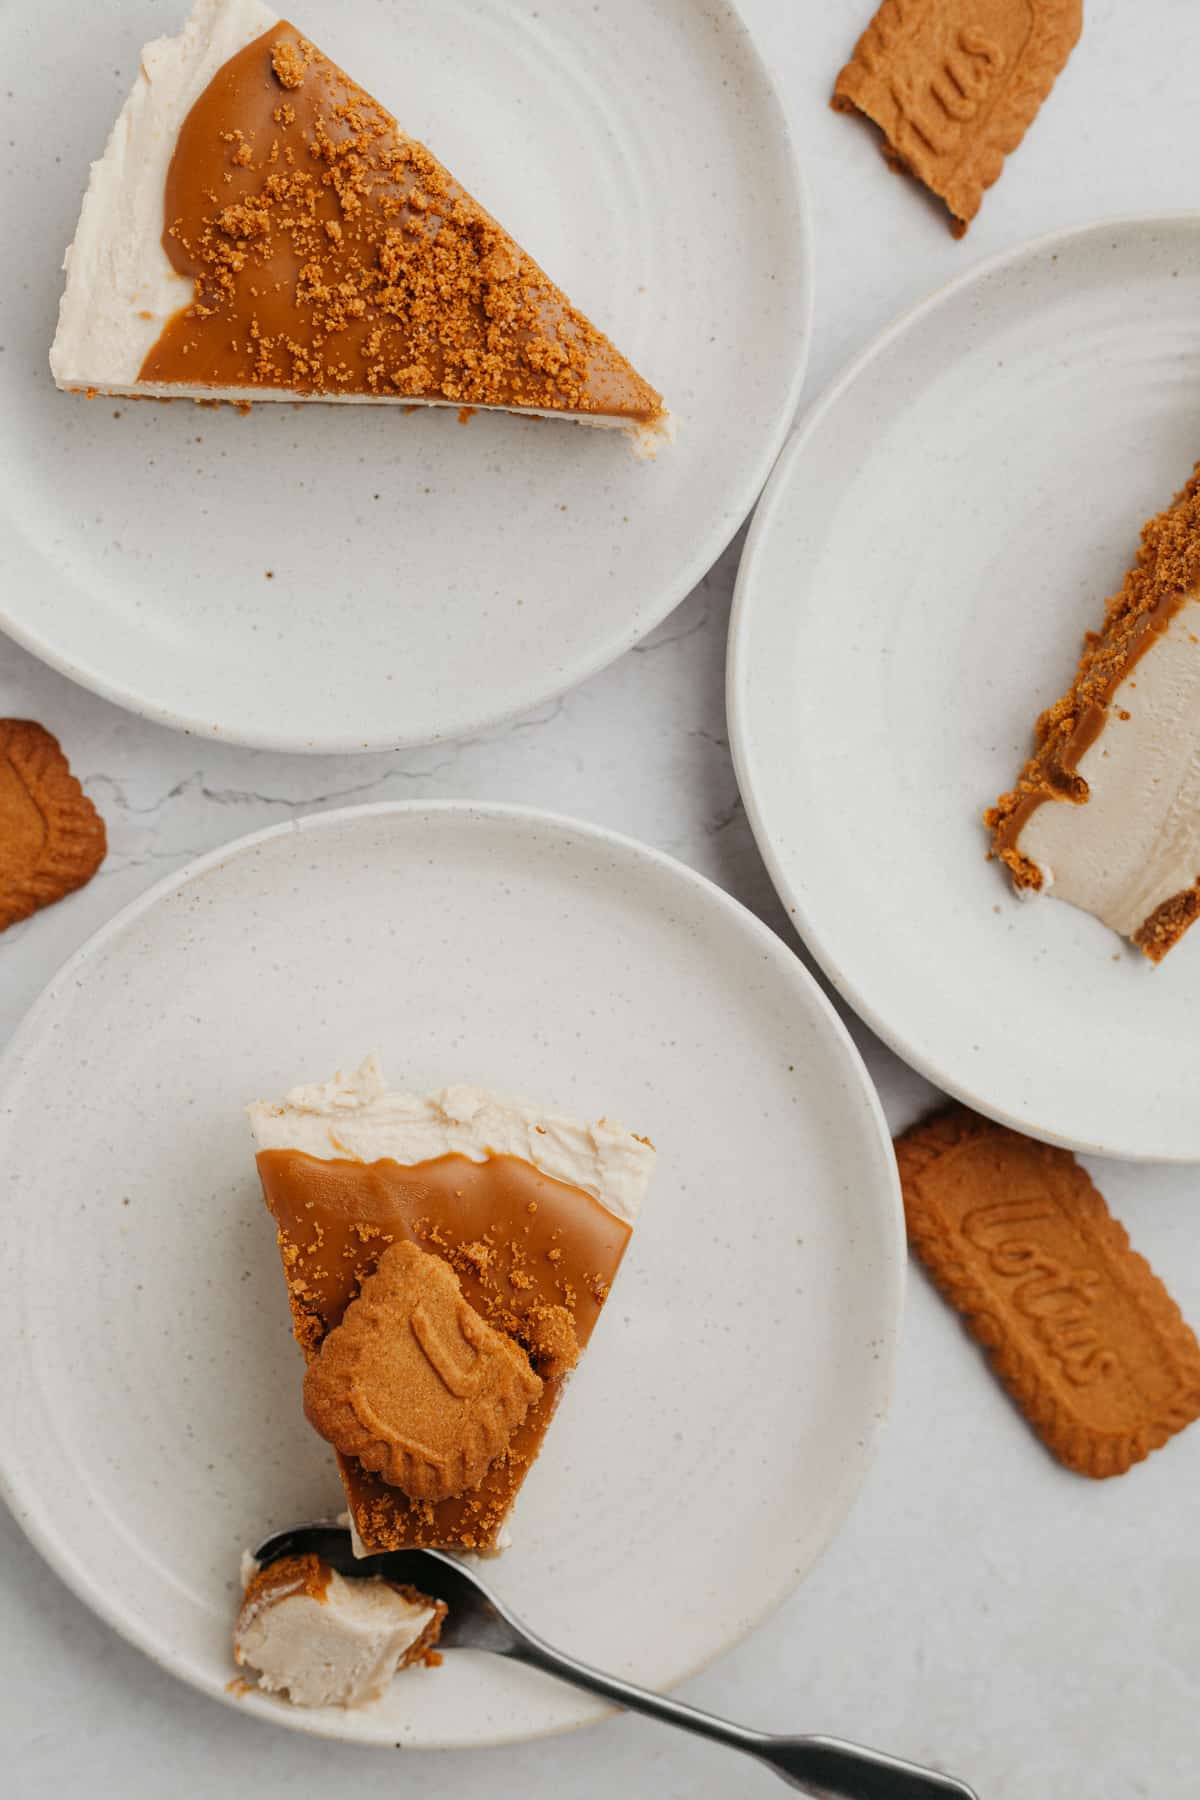 Several small white plates, each one has a slice of Biscoff no bake cheesecake on it.